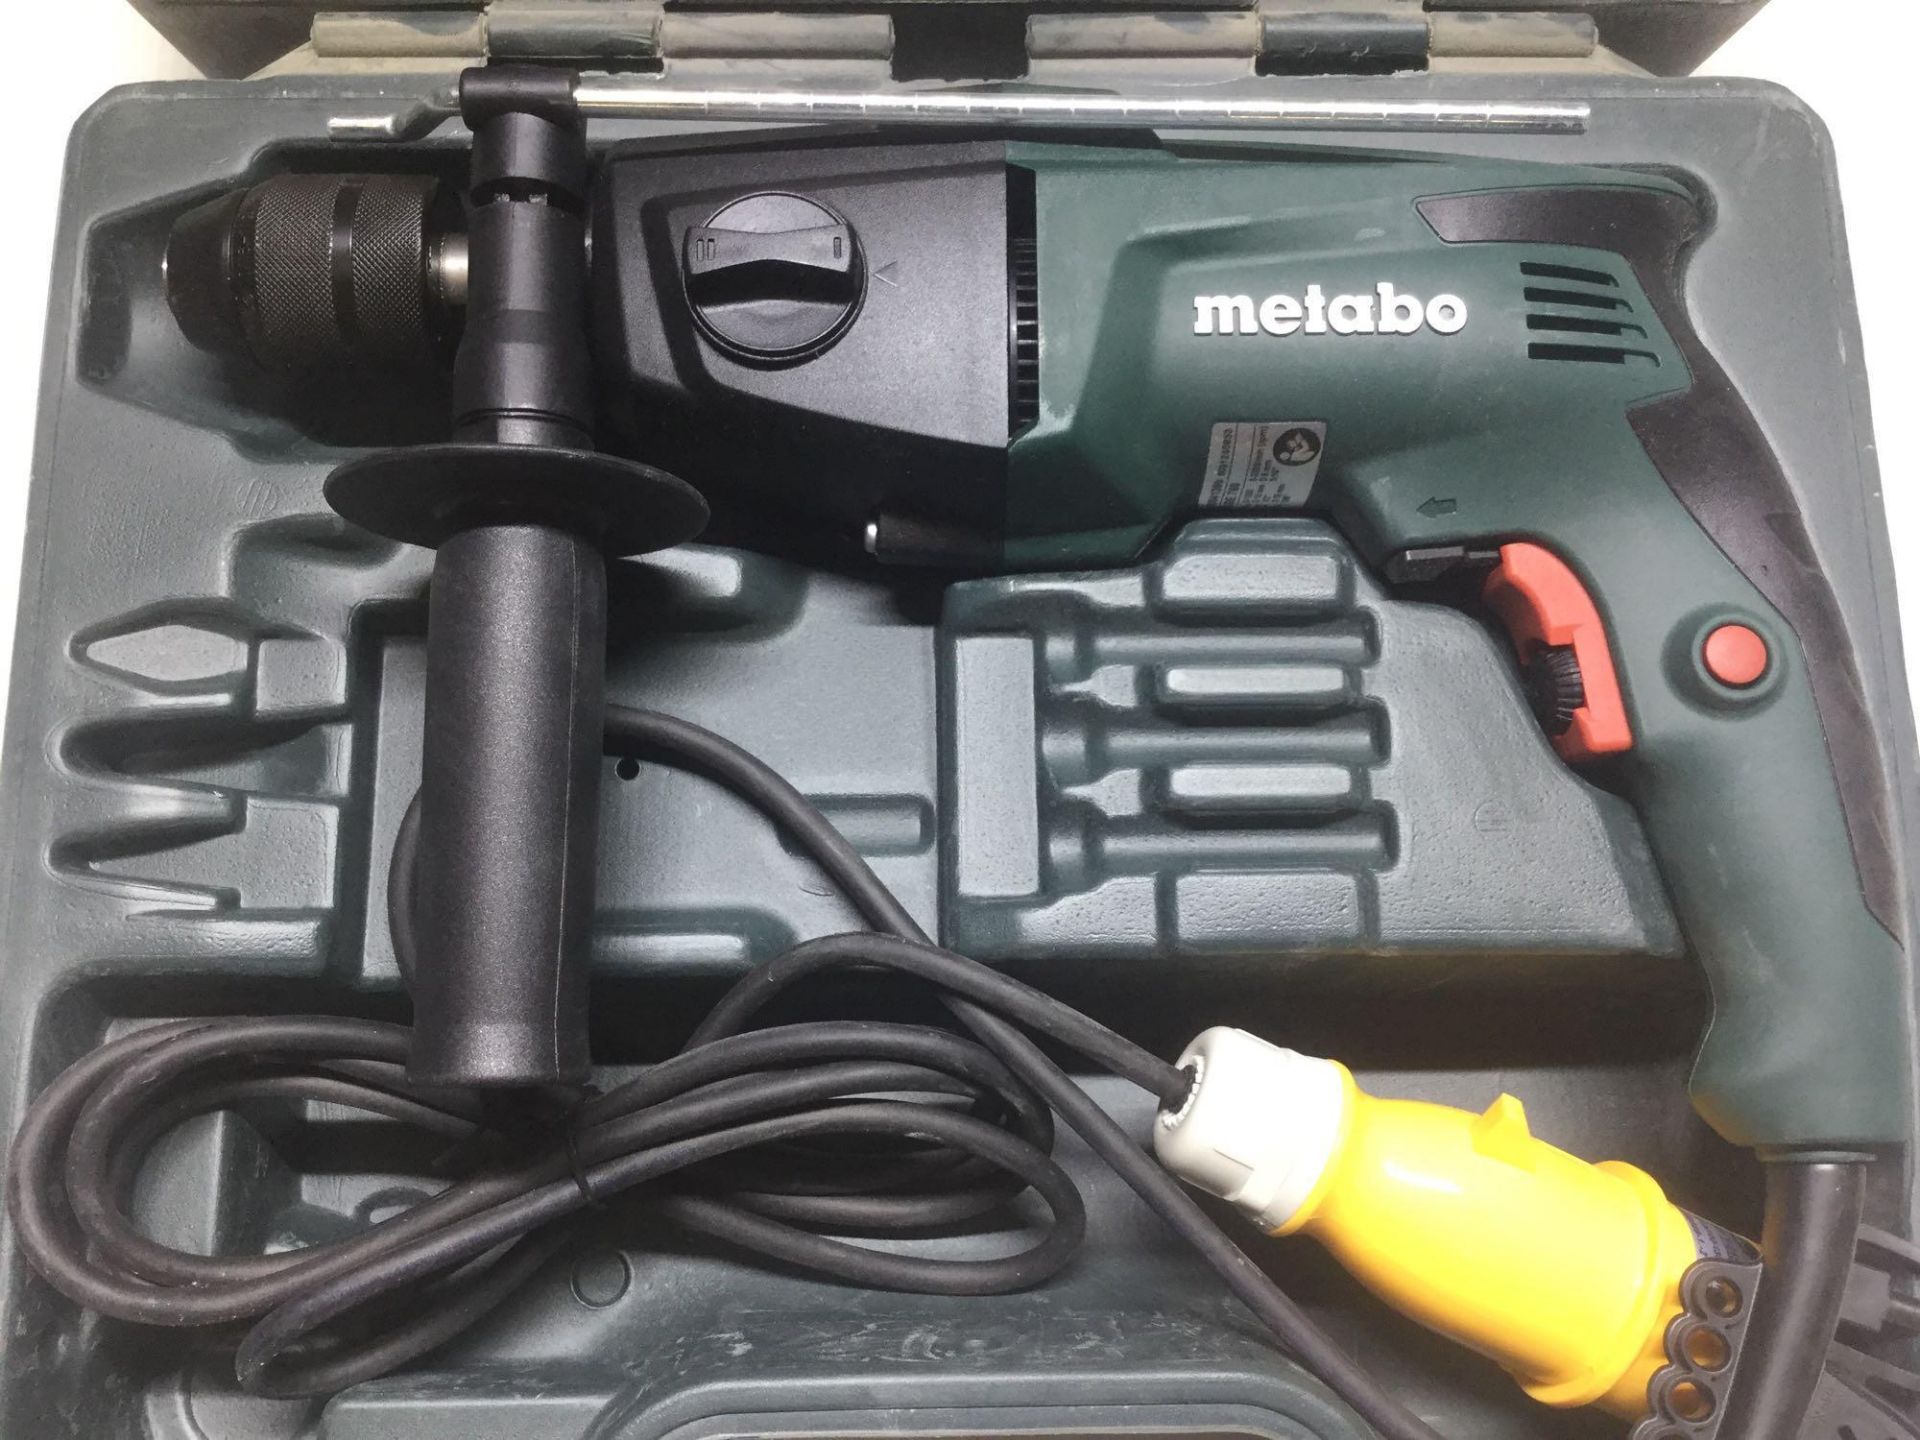 Metabo SBE760 Hammer Drill 110v New in Box - Image 2 of 5